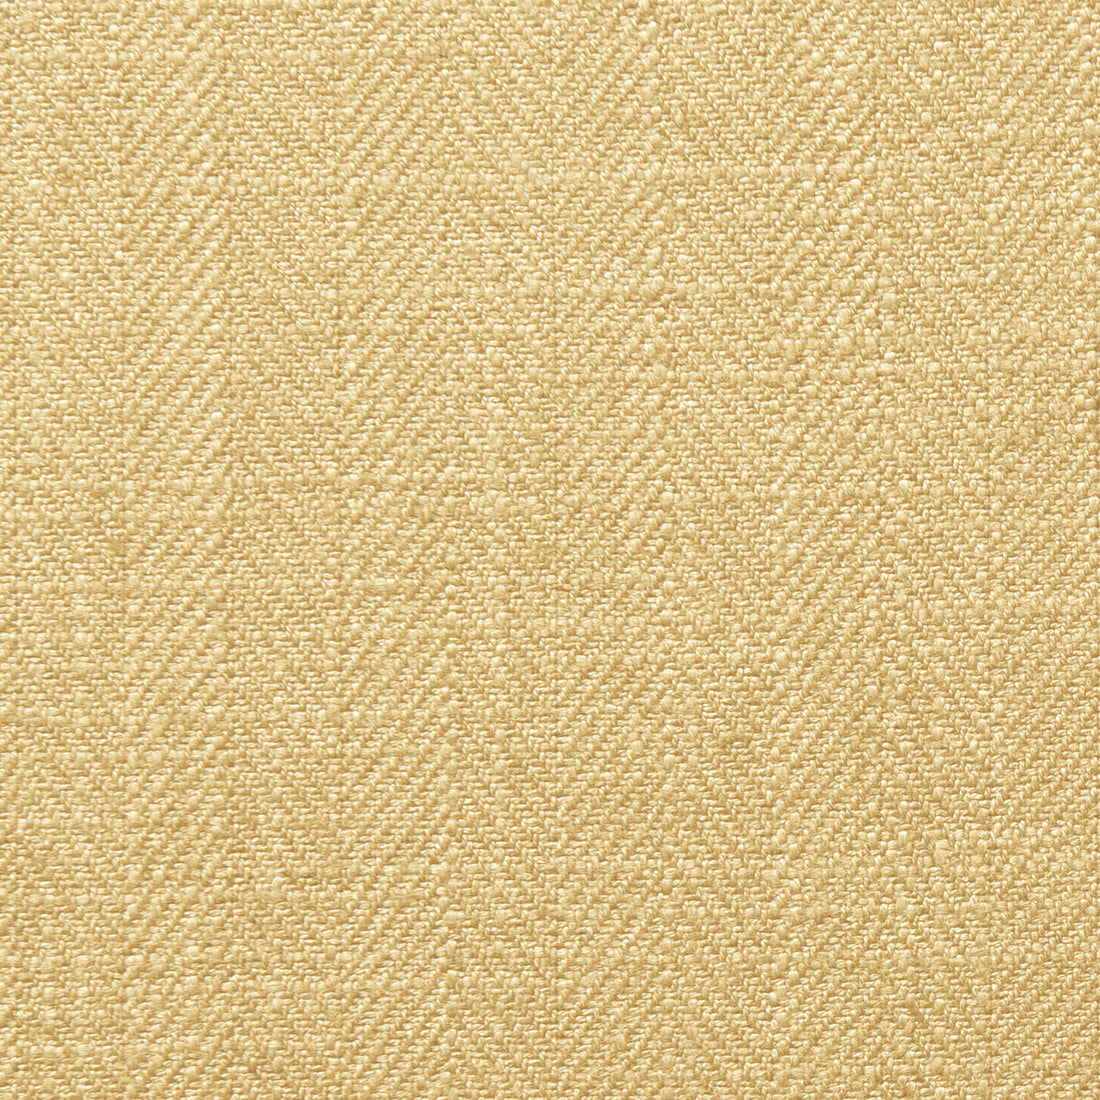 Henley fabric in honey color - pattern F0648/17.CAC.0 - by Clarke And Clarke in the Clarke &amp; Clarke Henley collection